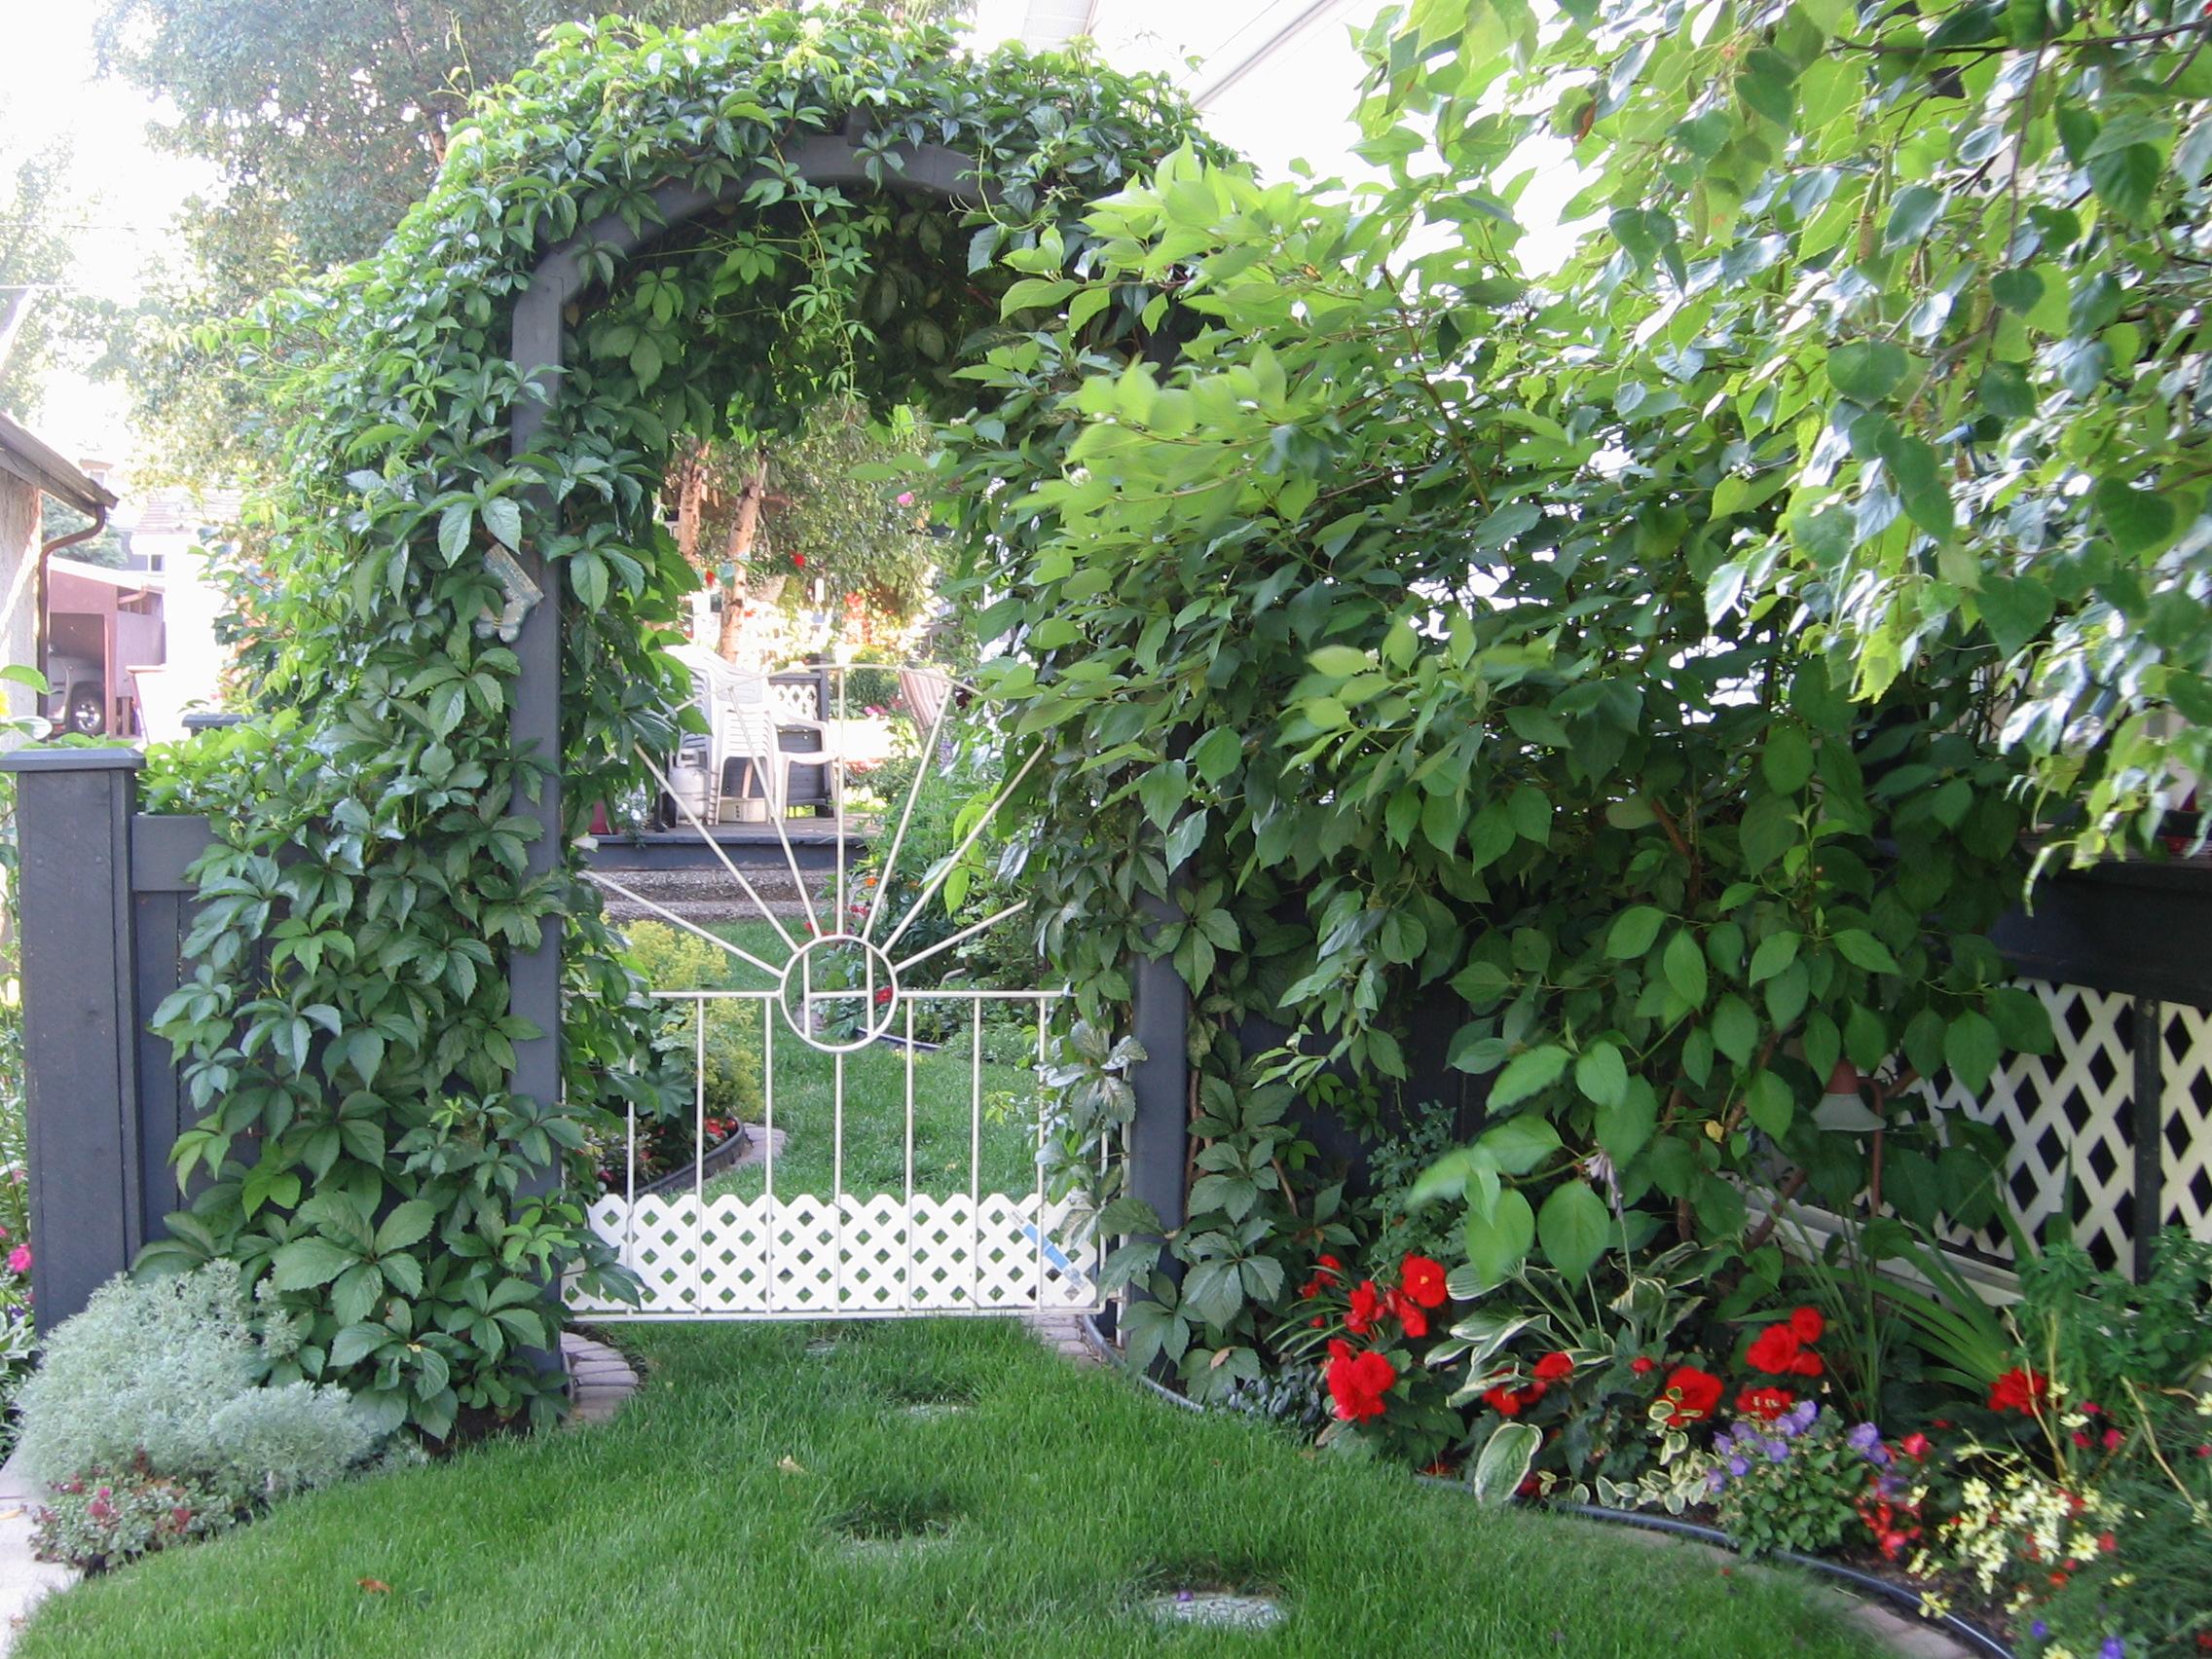 How To Plan A Garden: An Easy 4-Step Guide